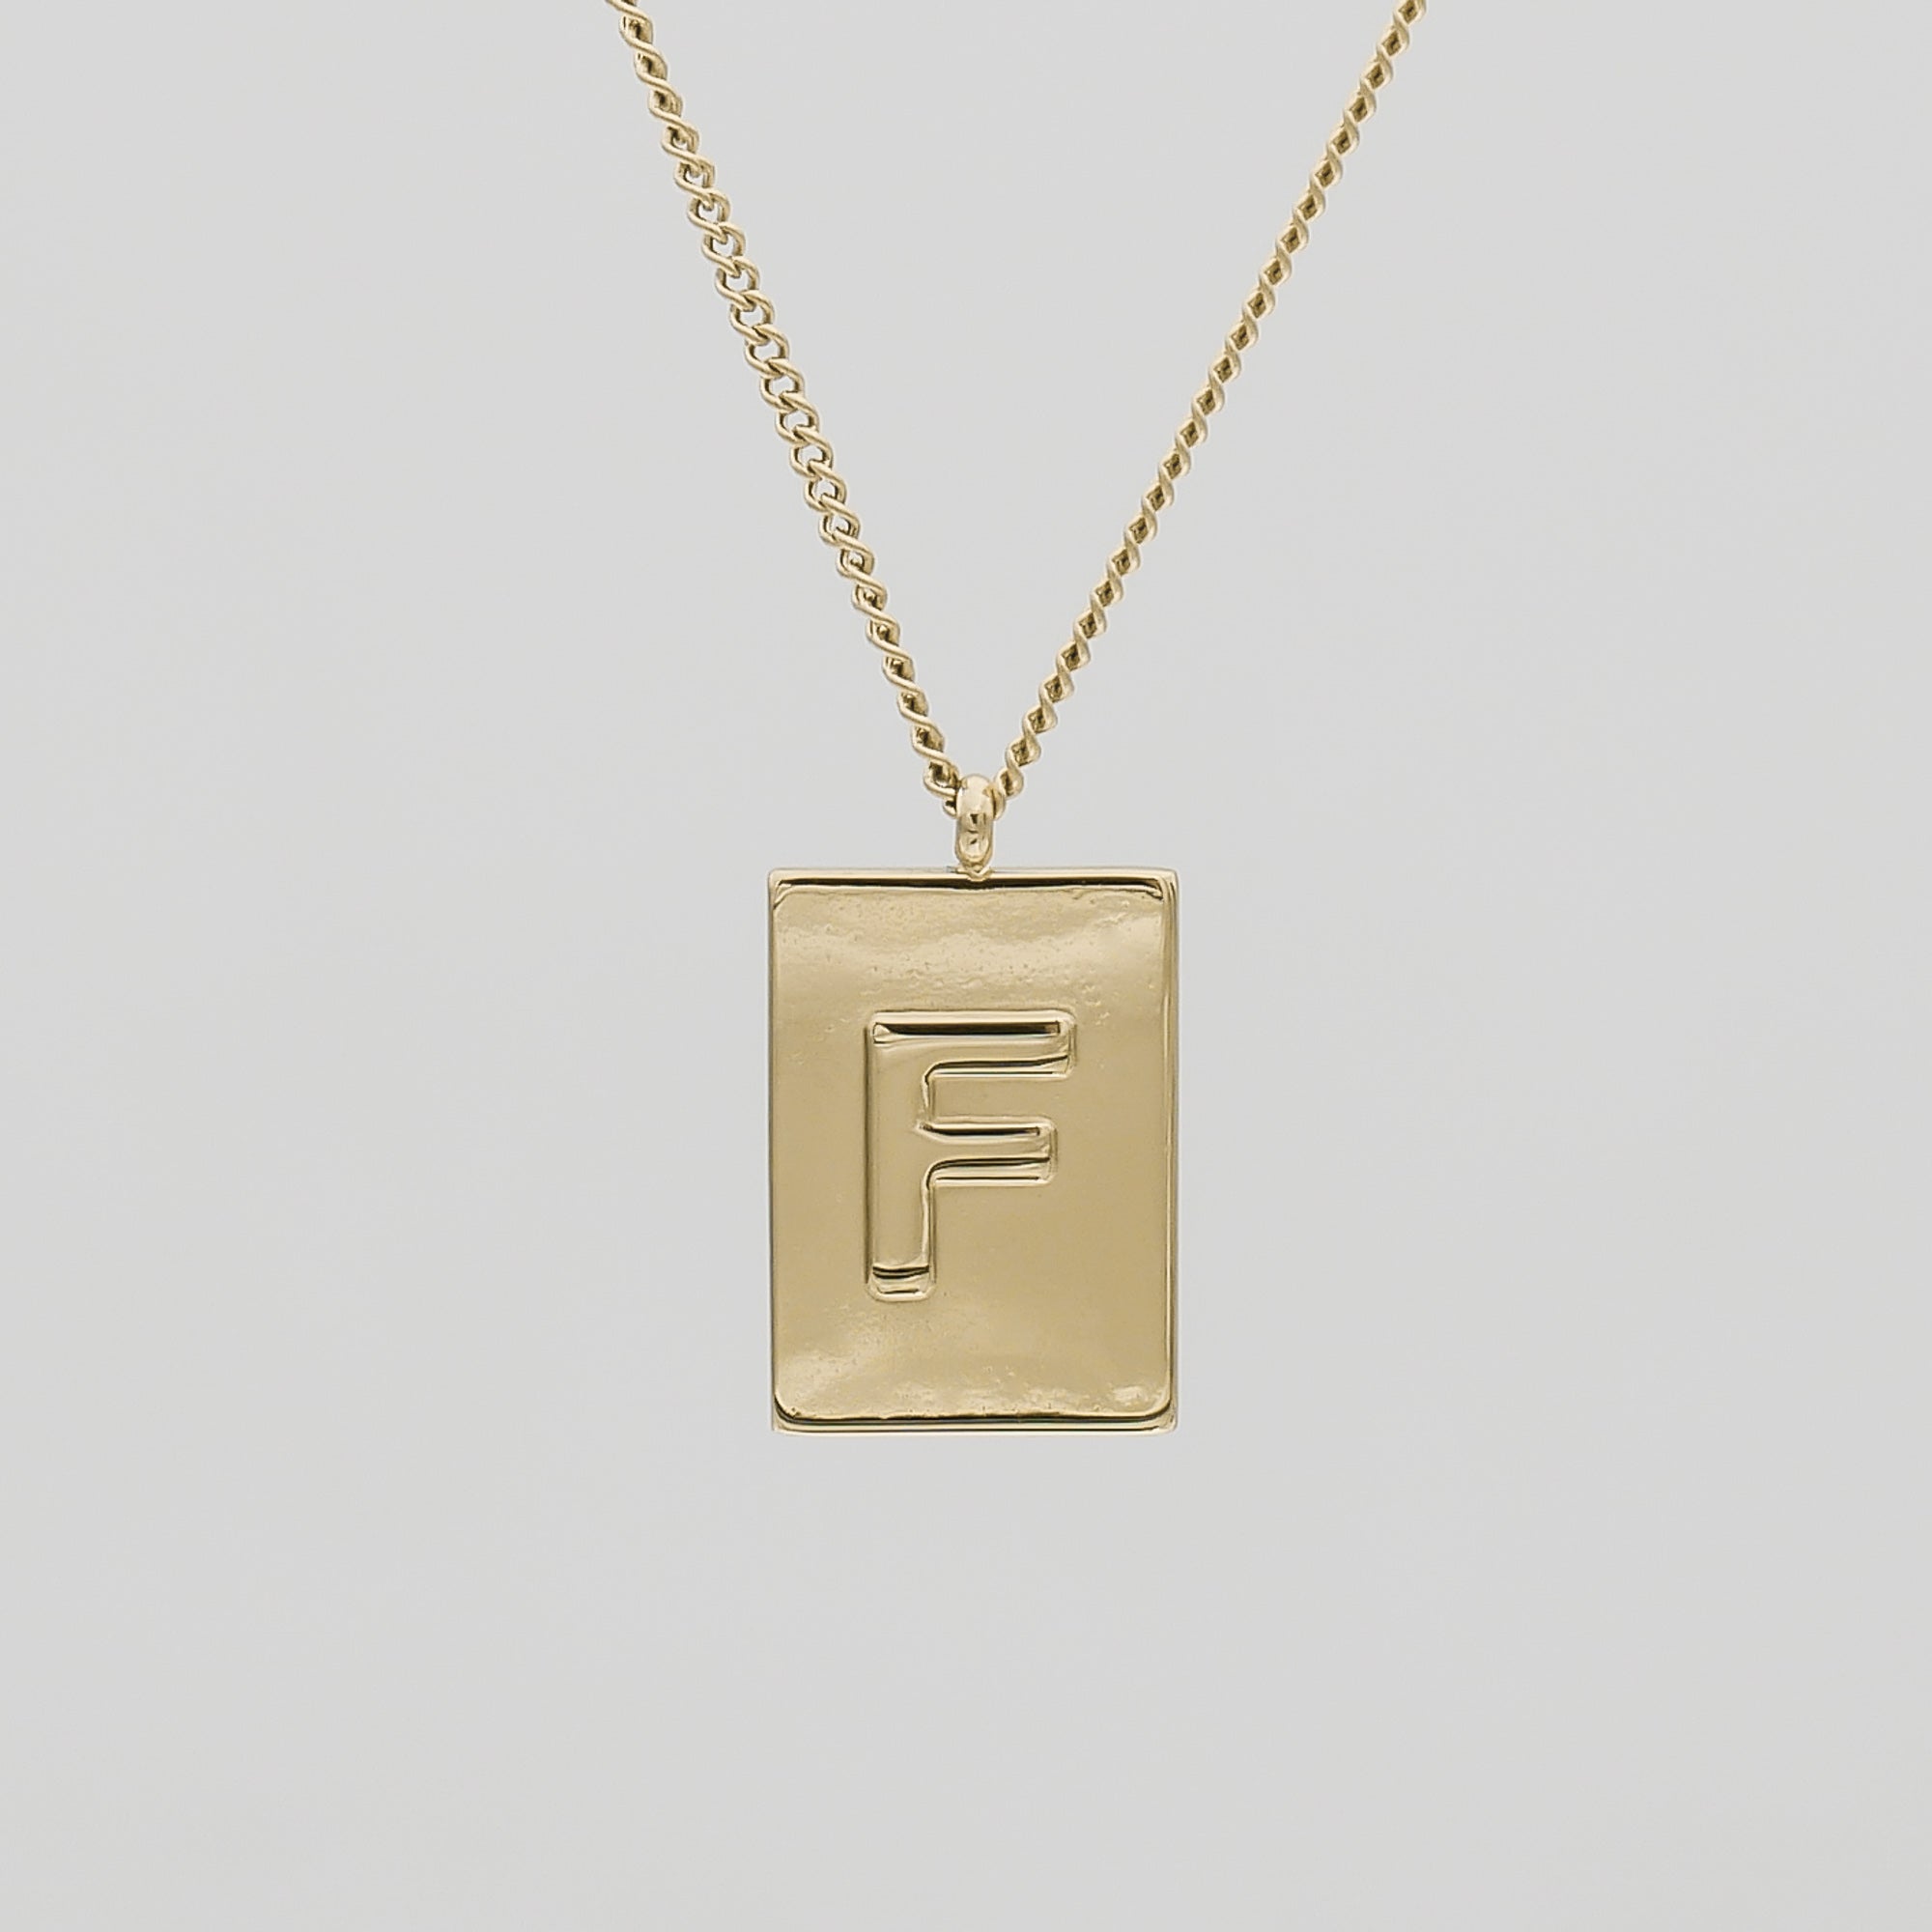 Athena custom initial Gold pendant Necklace, letter F by PRYA